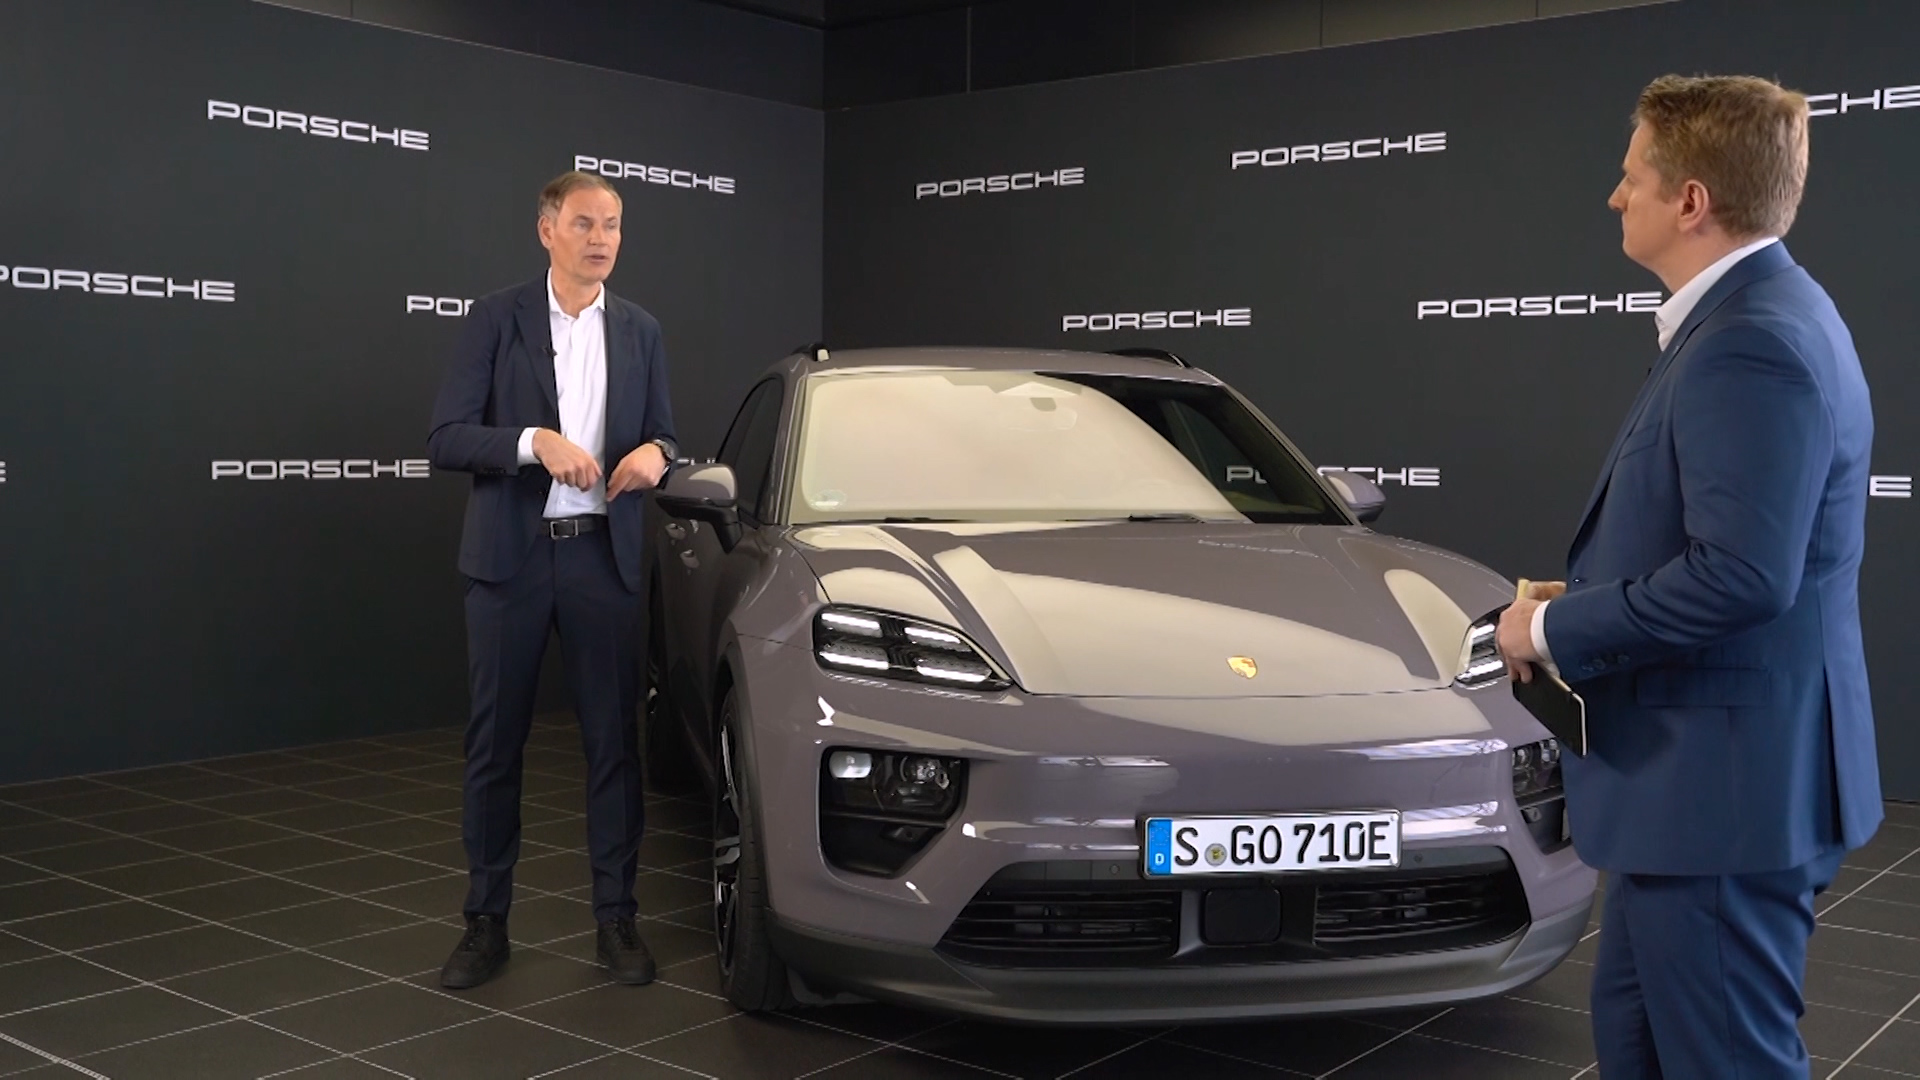 'Electromobility is the future': Porsche CEO targets innovation